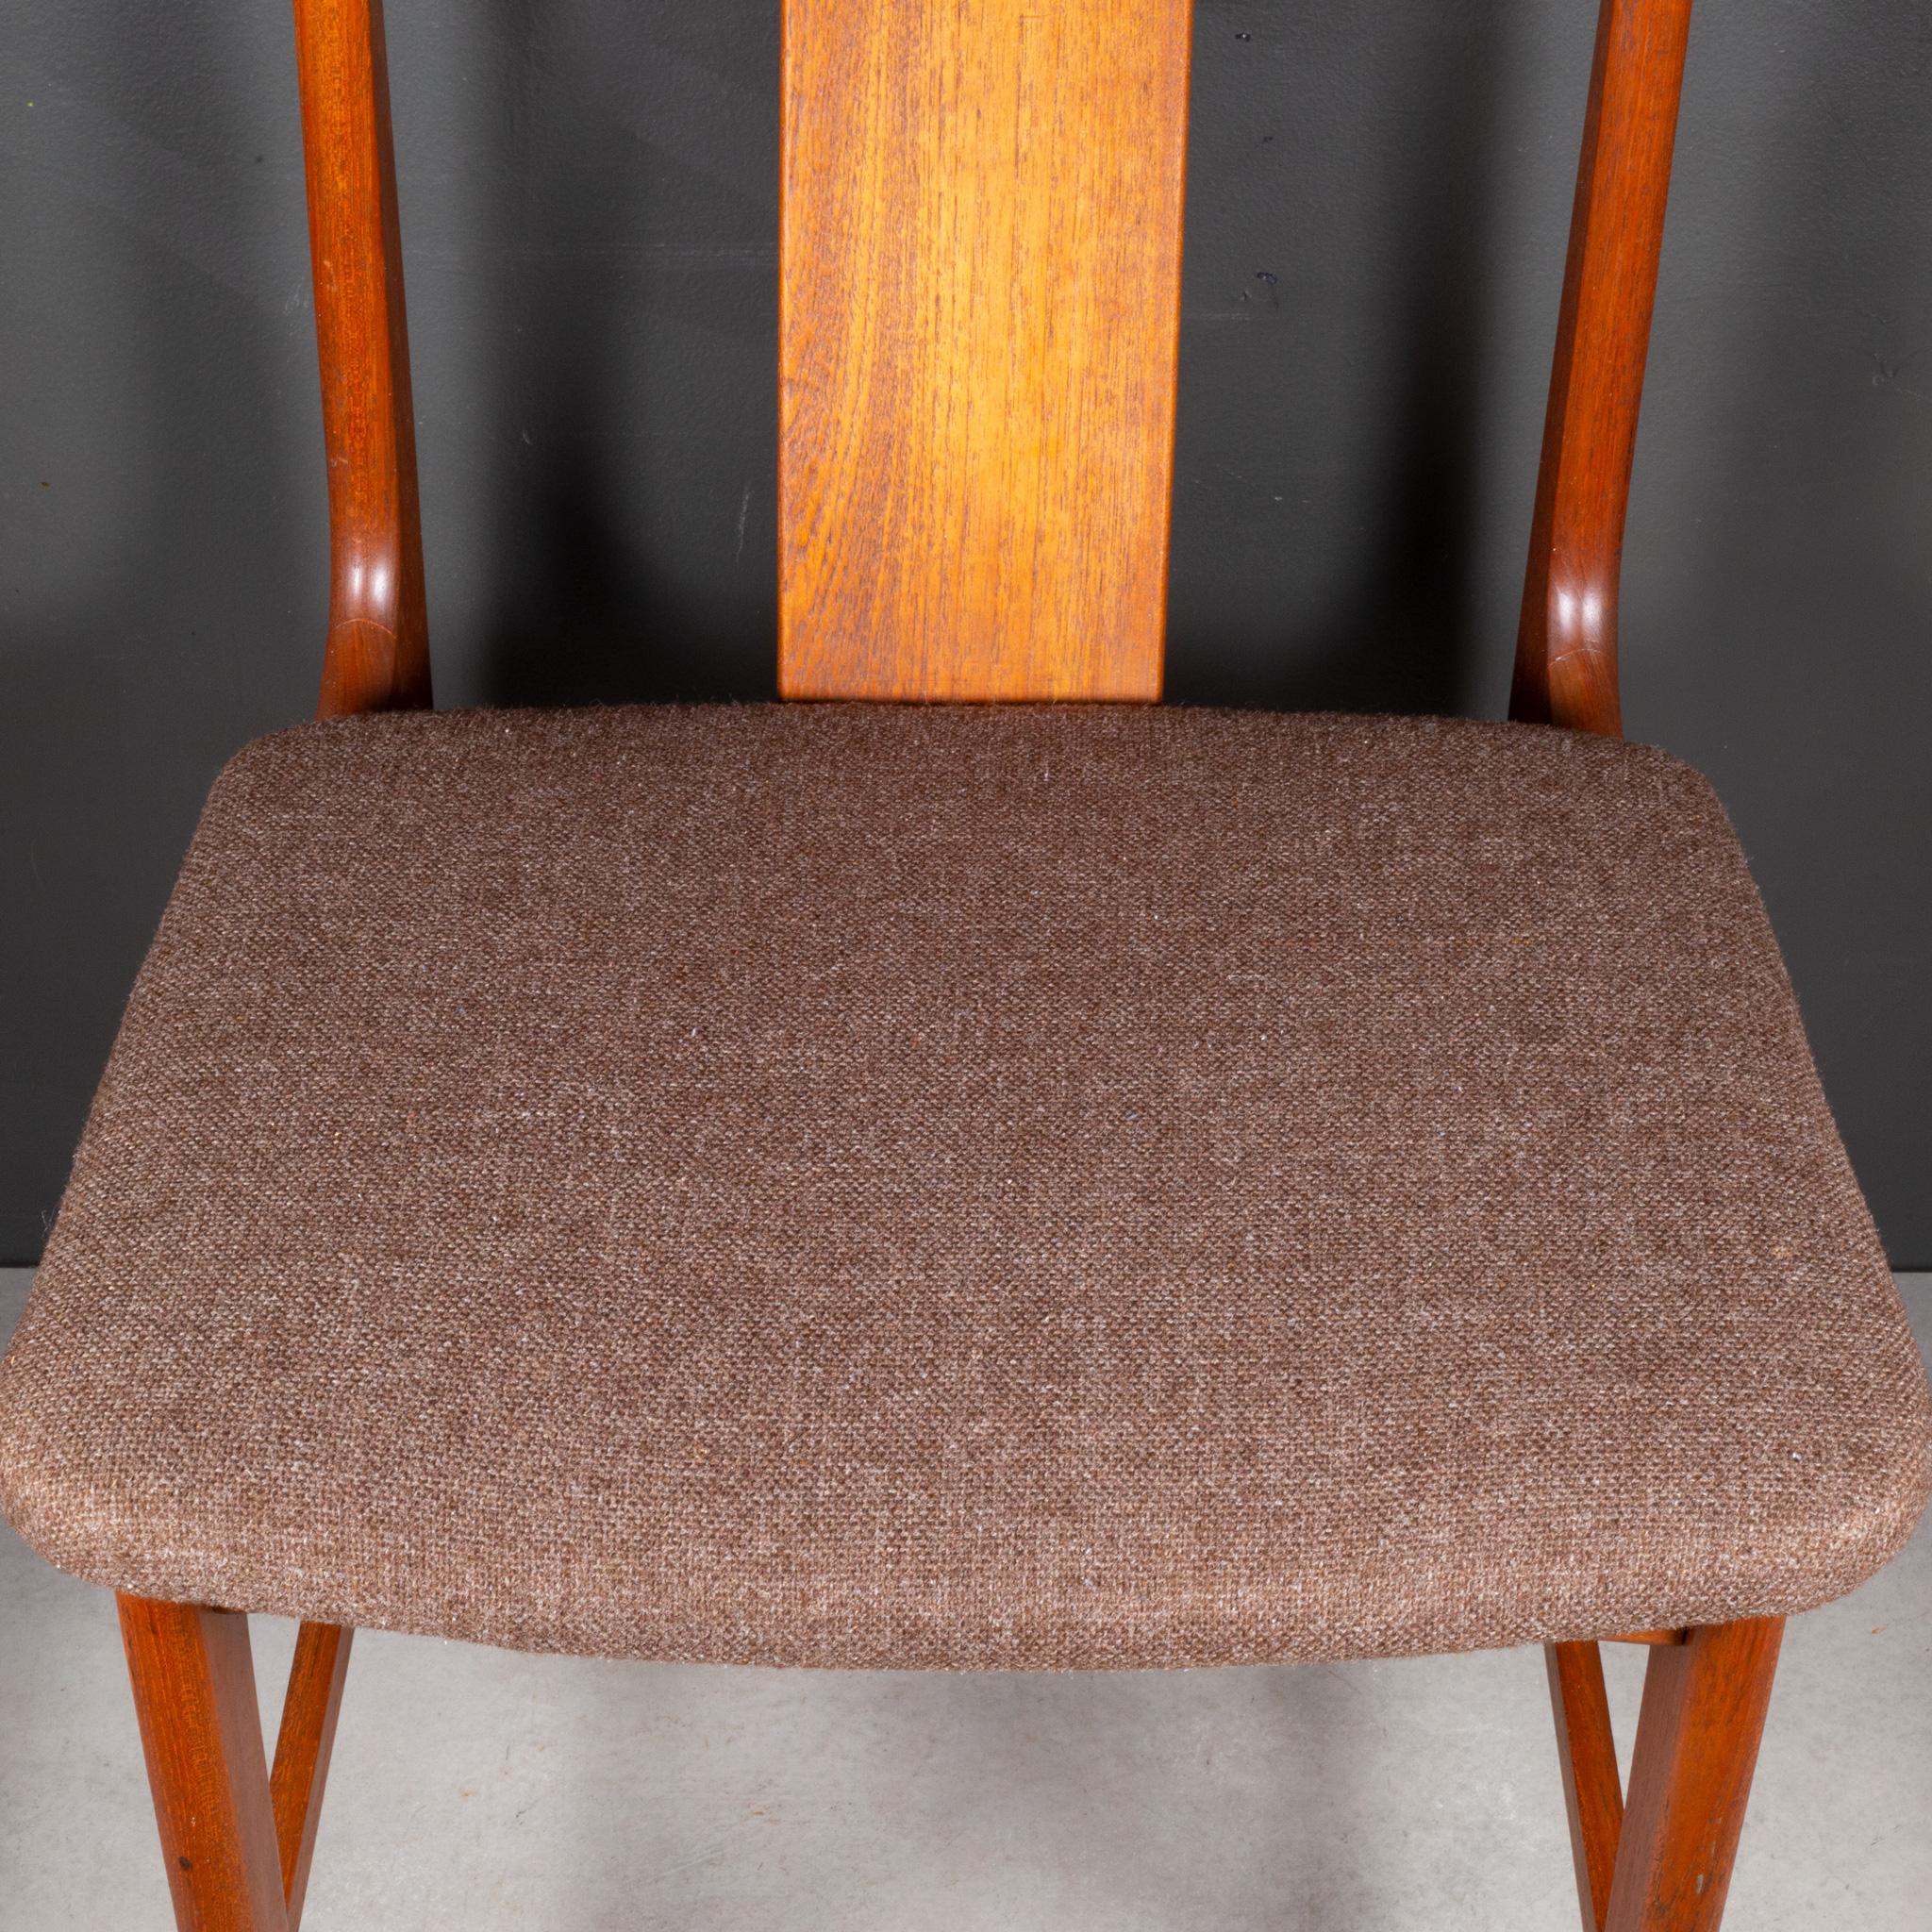 Midcentury Japanese Sculpted Teak Dining Chairs C.1960 For Sale 4